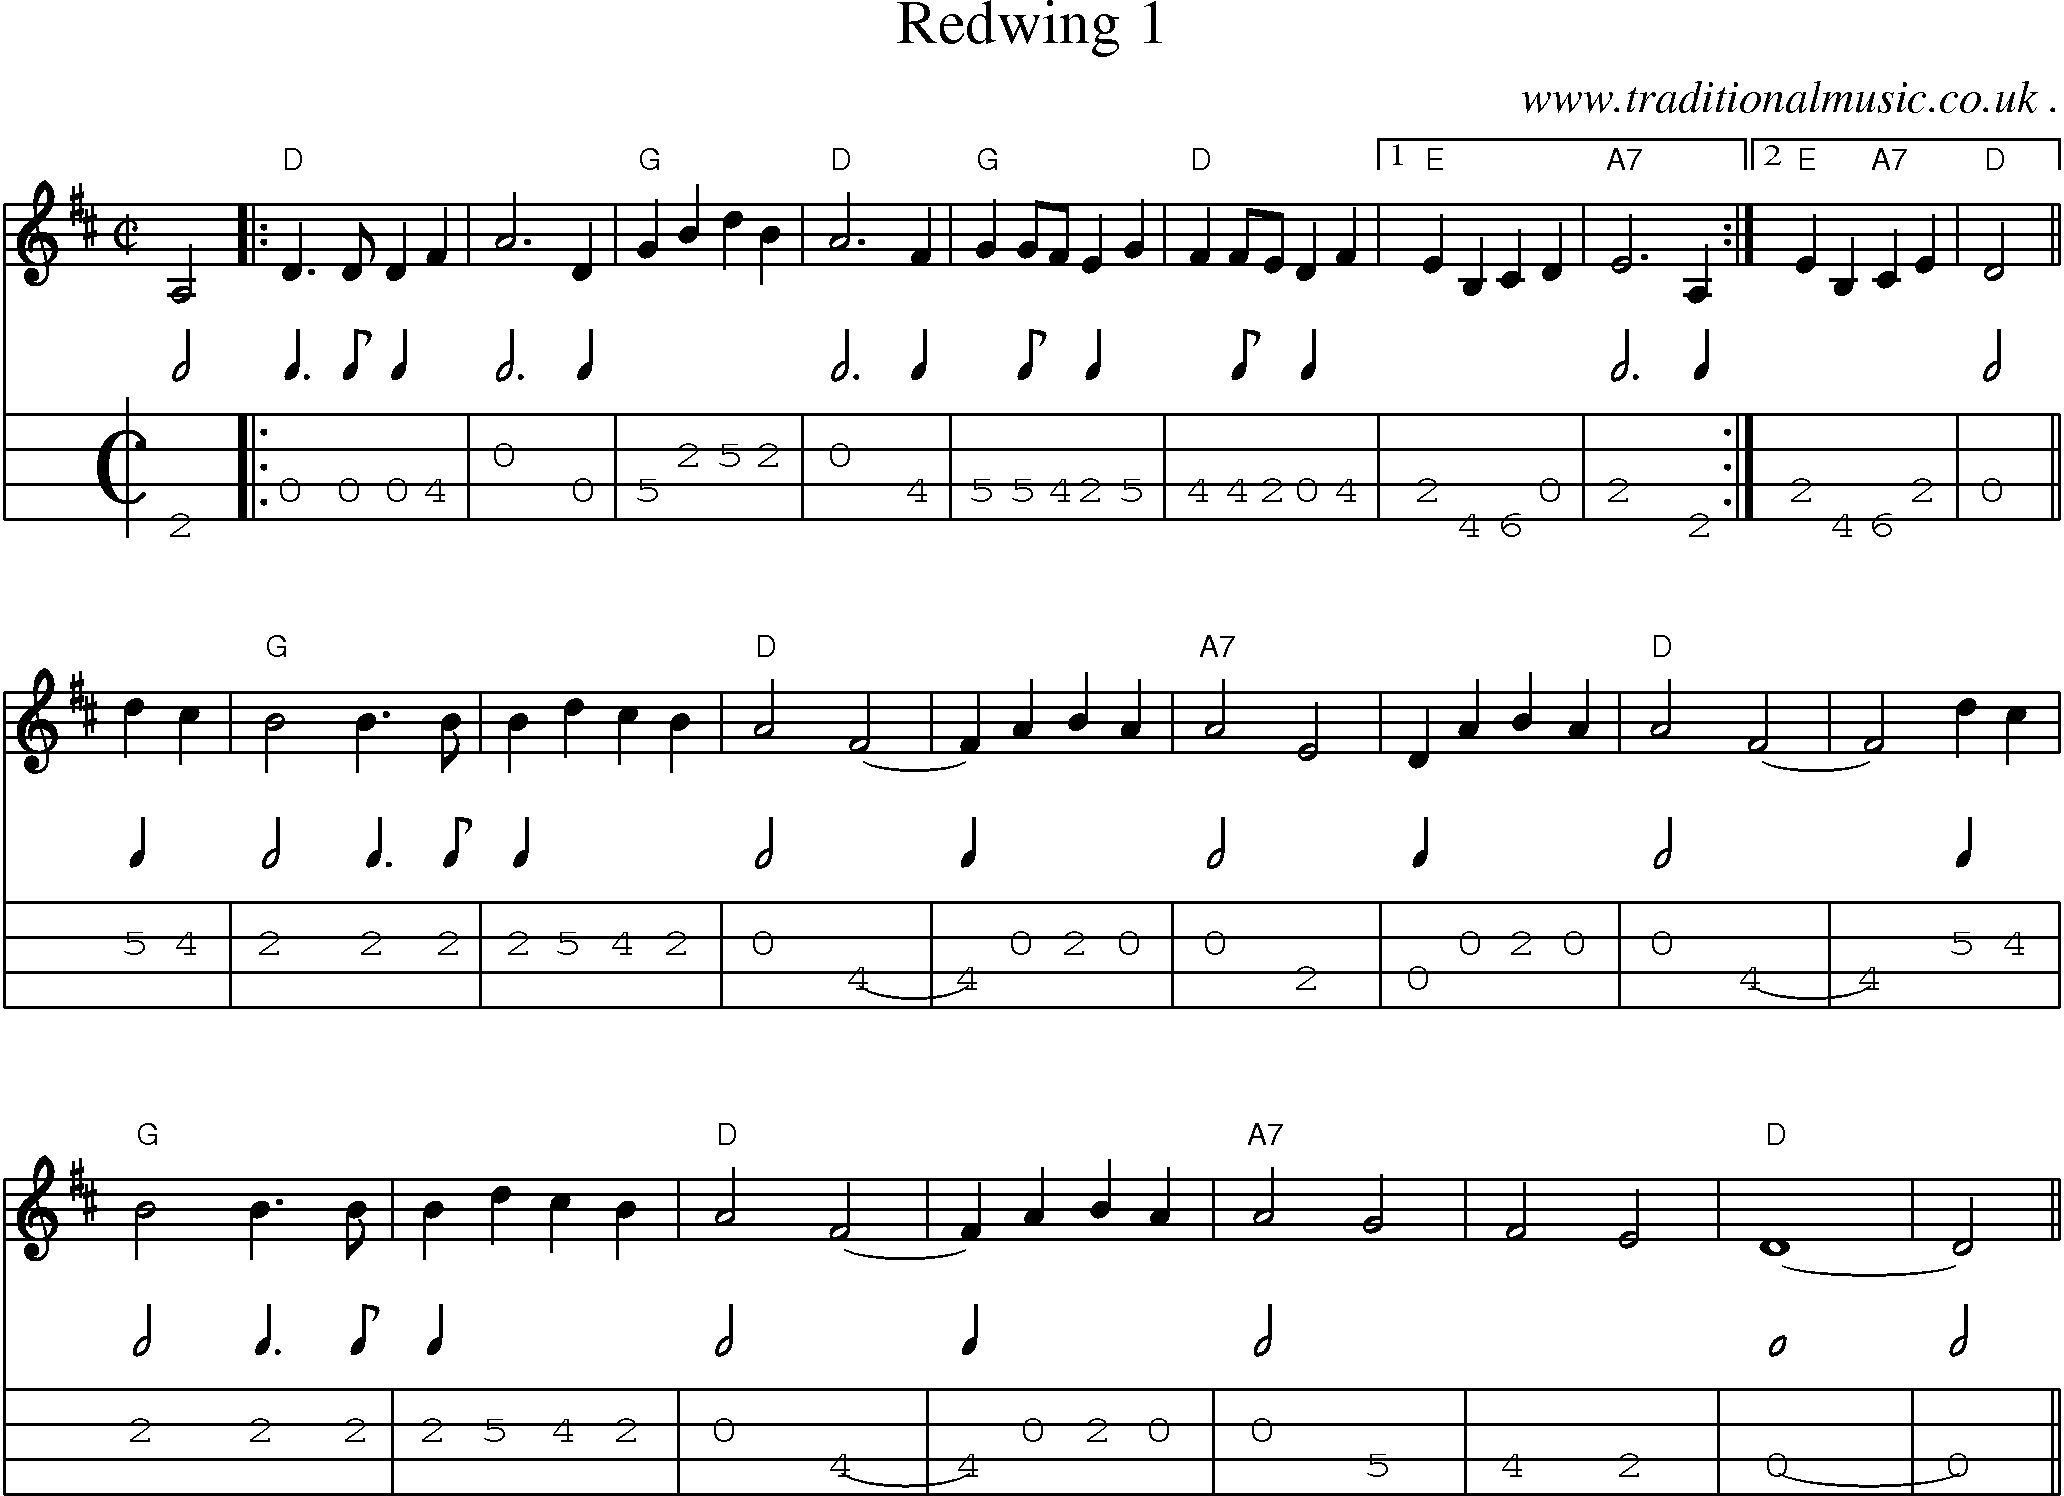 Music Score and Guitar Tabs for Redwing 1